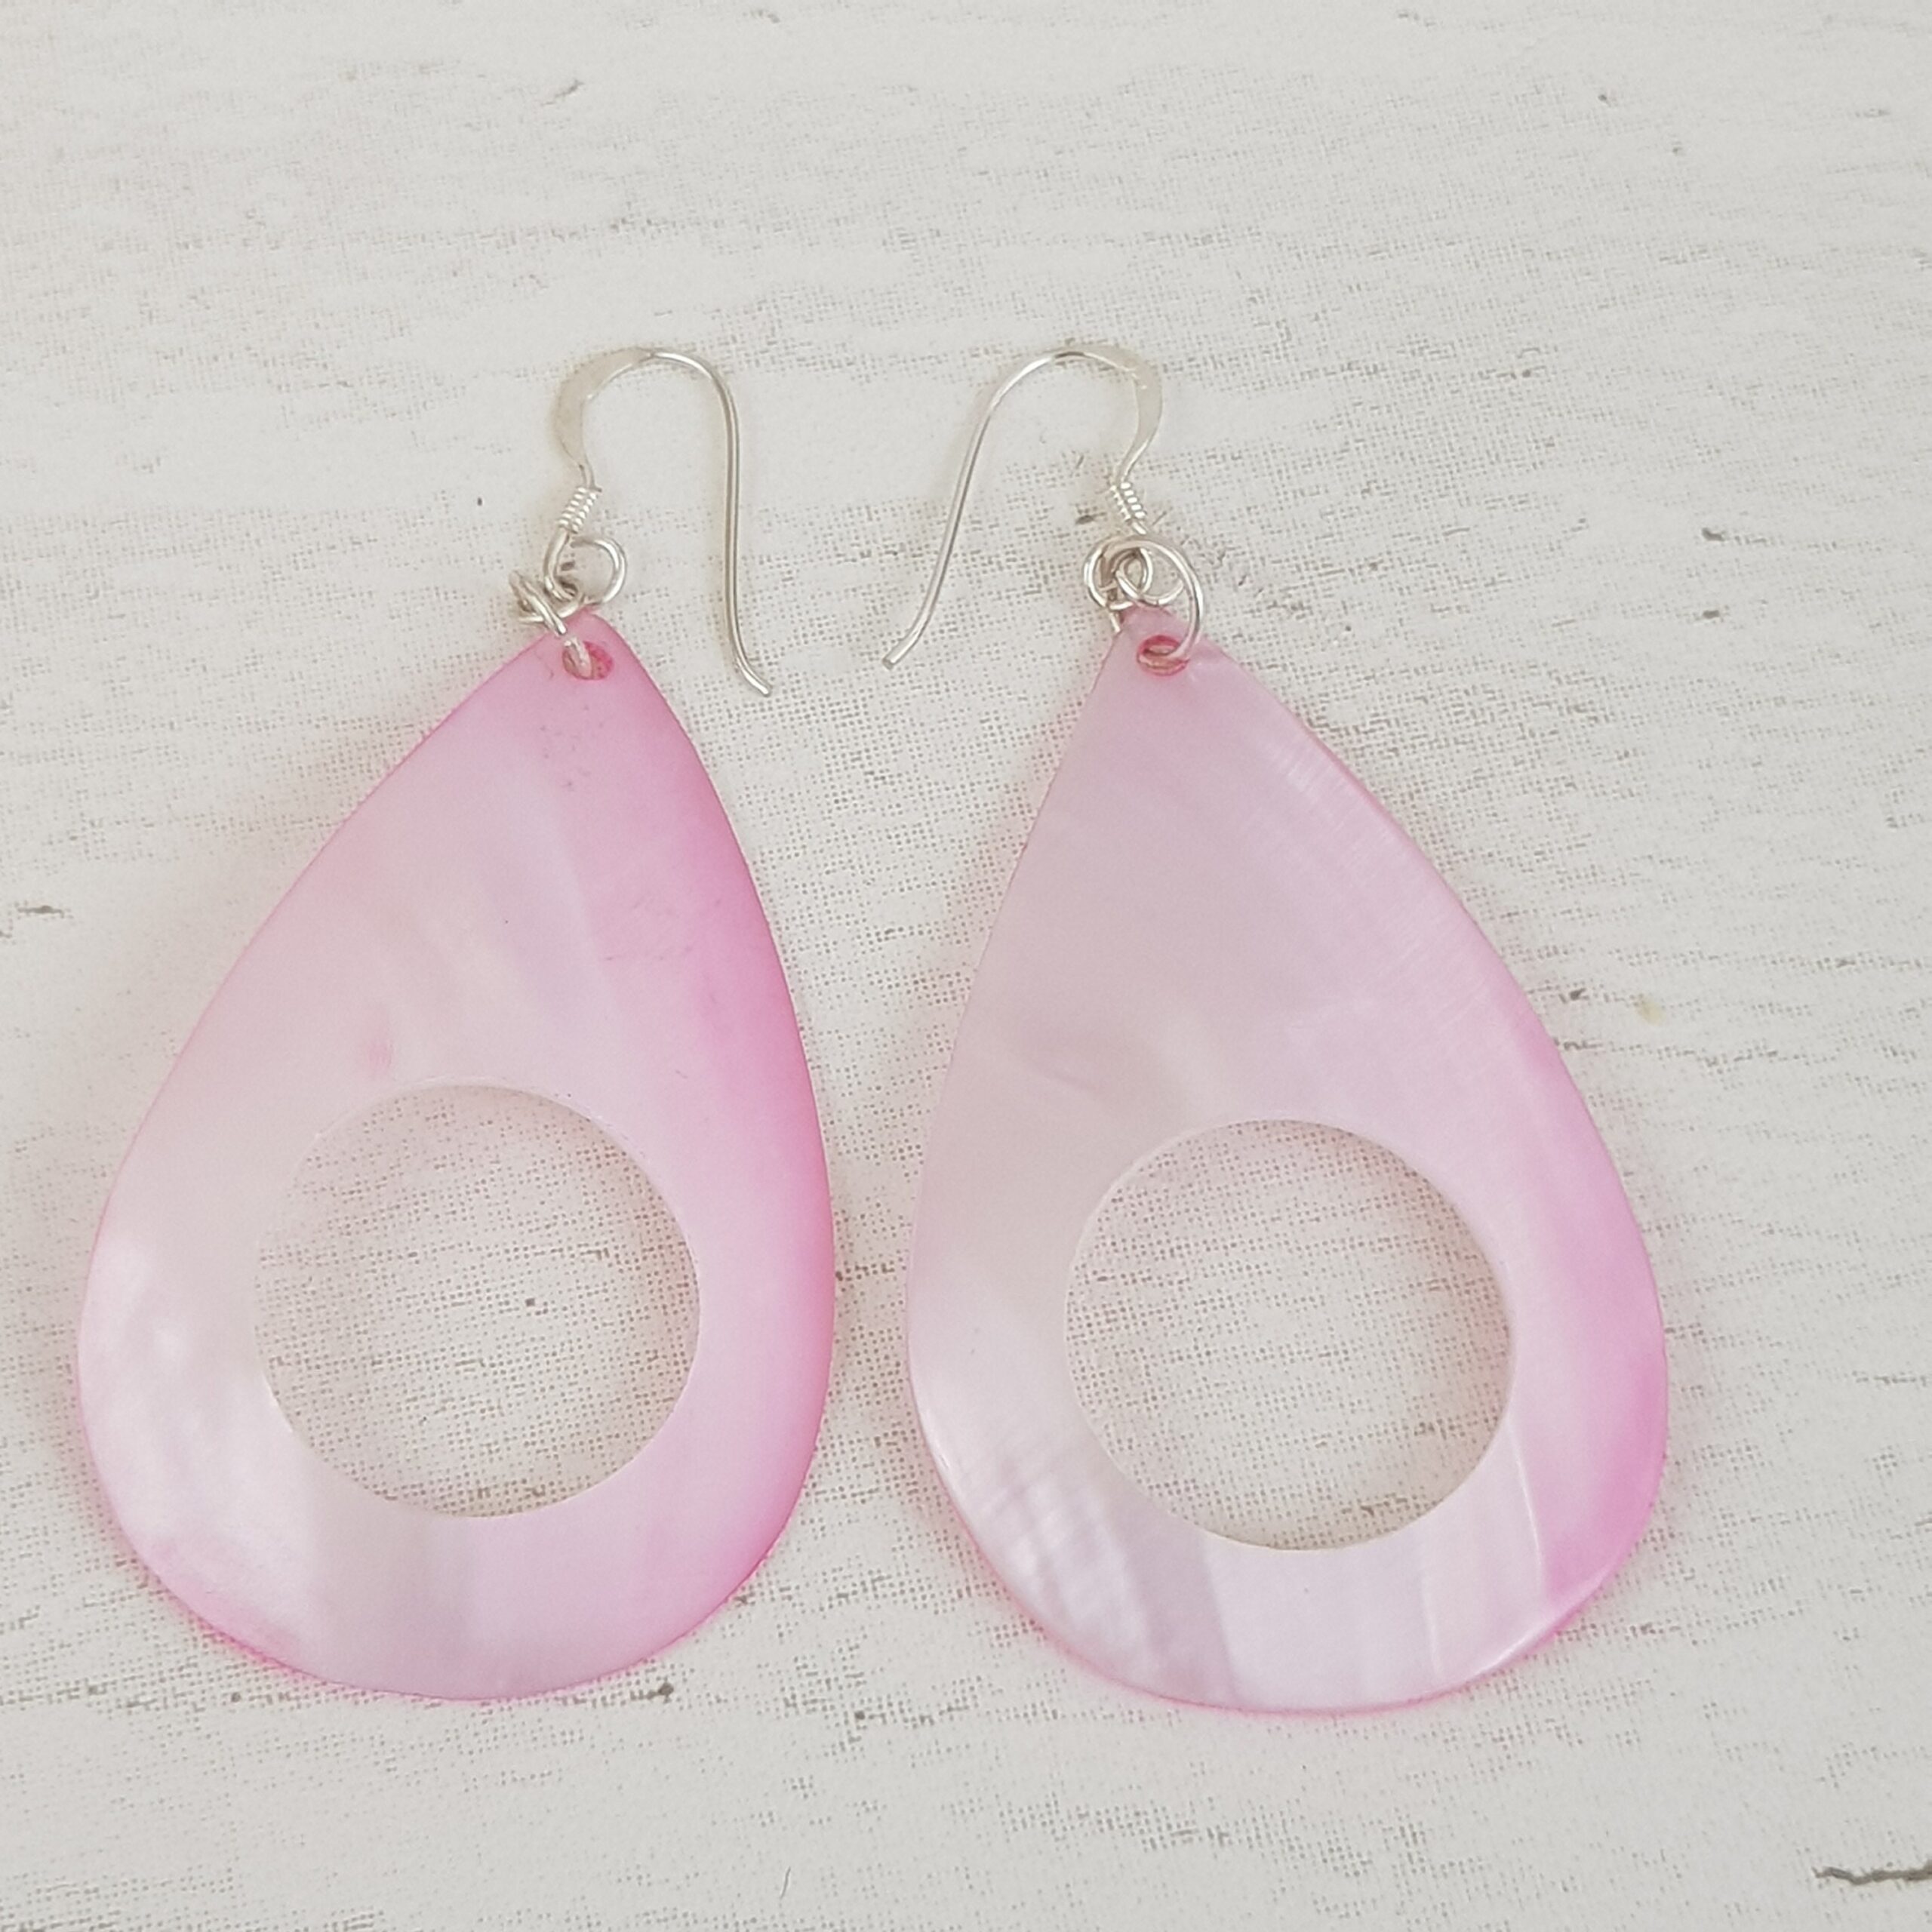 PINK MOTHER OF PEARL  PEARLESCENT SEASHELL DANGLE  EARRINGS 80's VINTAGE 